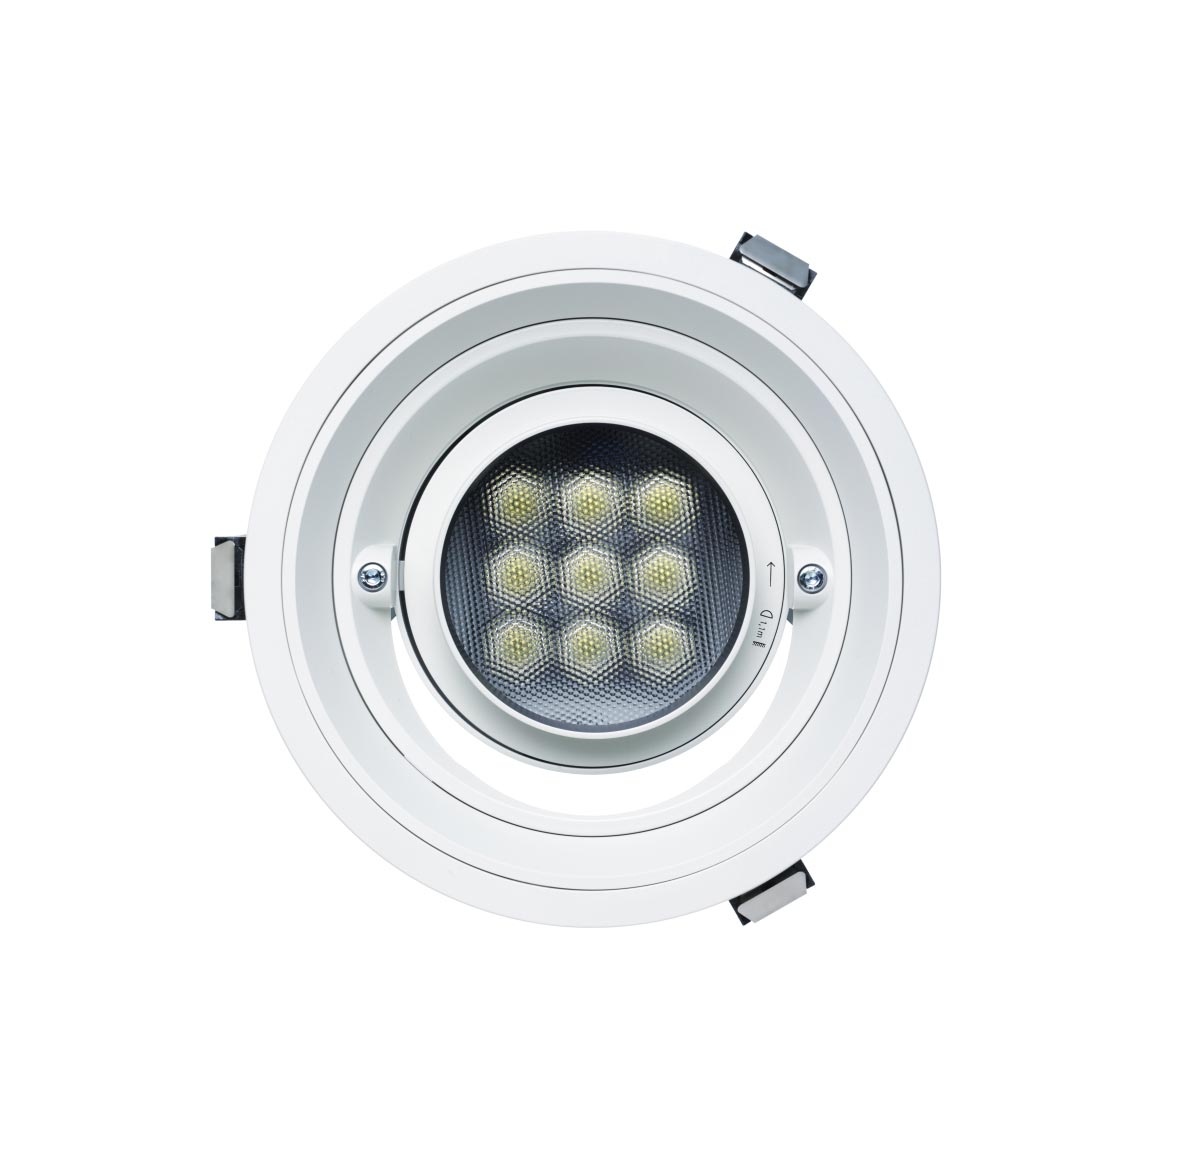 Quintessence Round Recessed Adjustable Spotlight With Flush Mounting Tray Wide Flood Beam 6W LED 4000K Trailing-edge Dimmable White Trim F/P